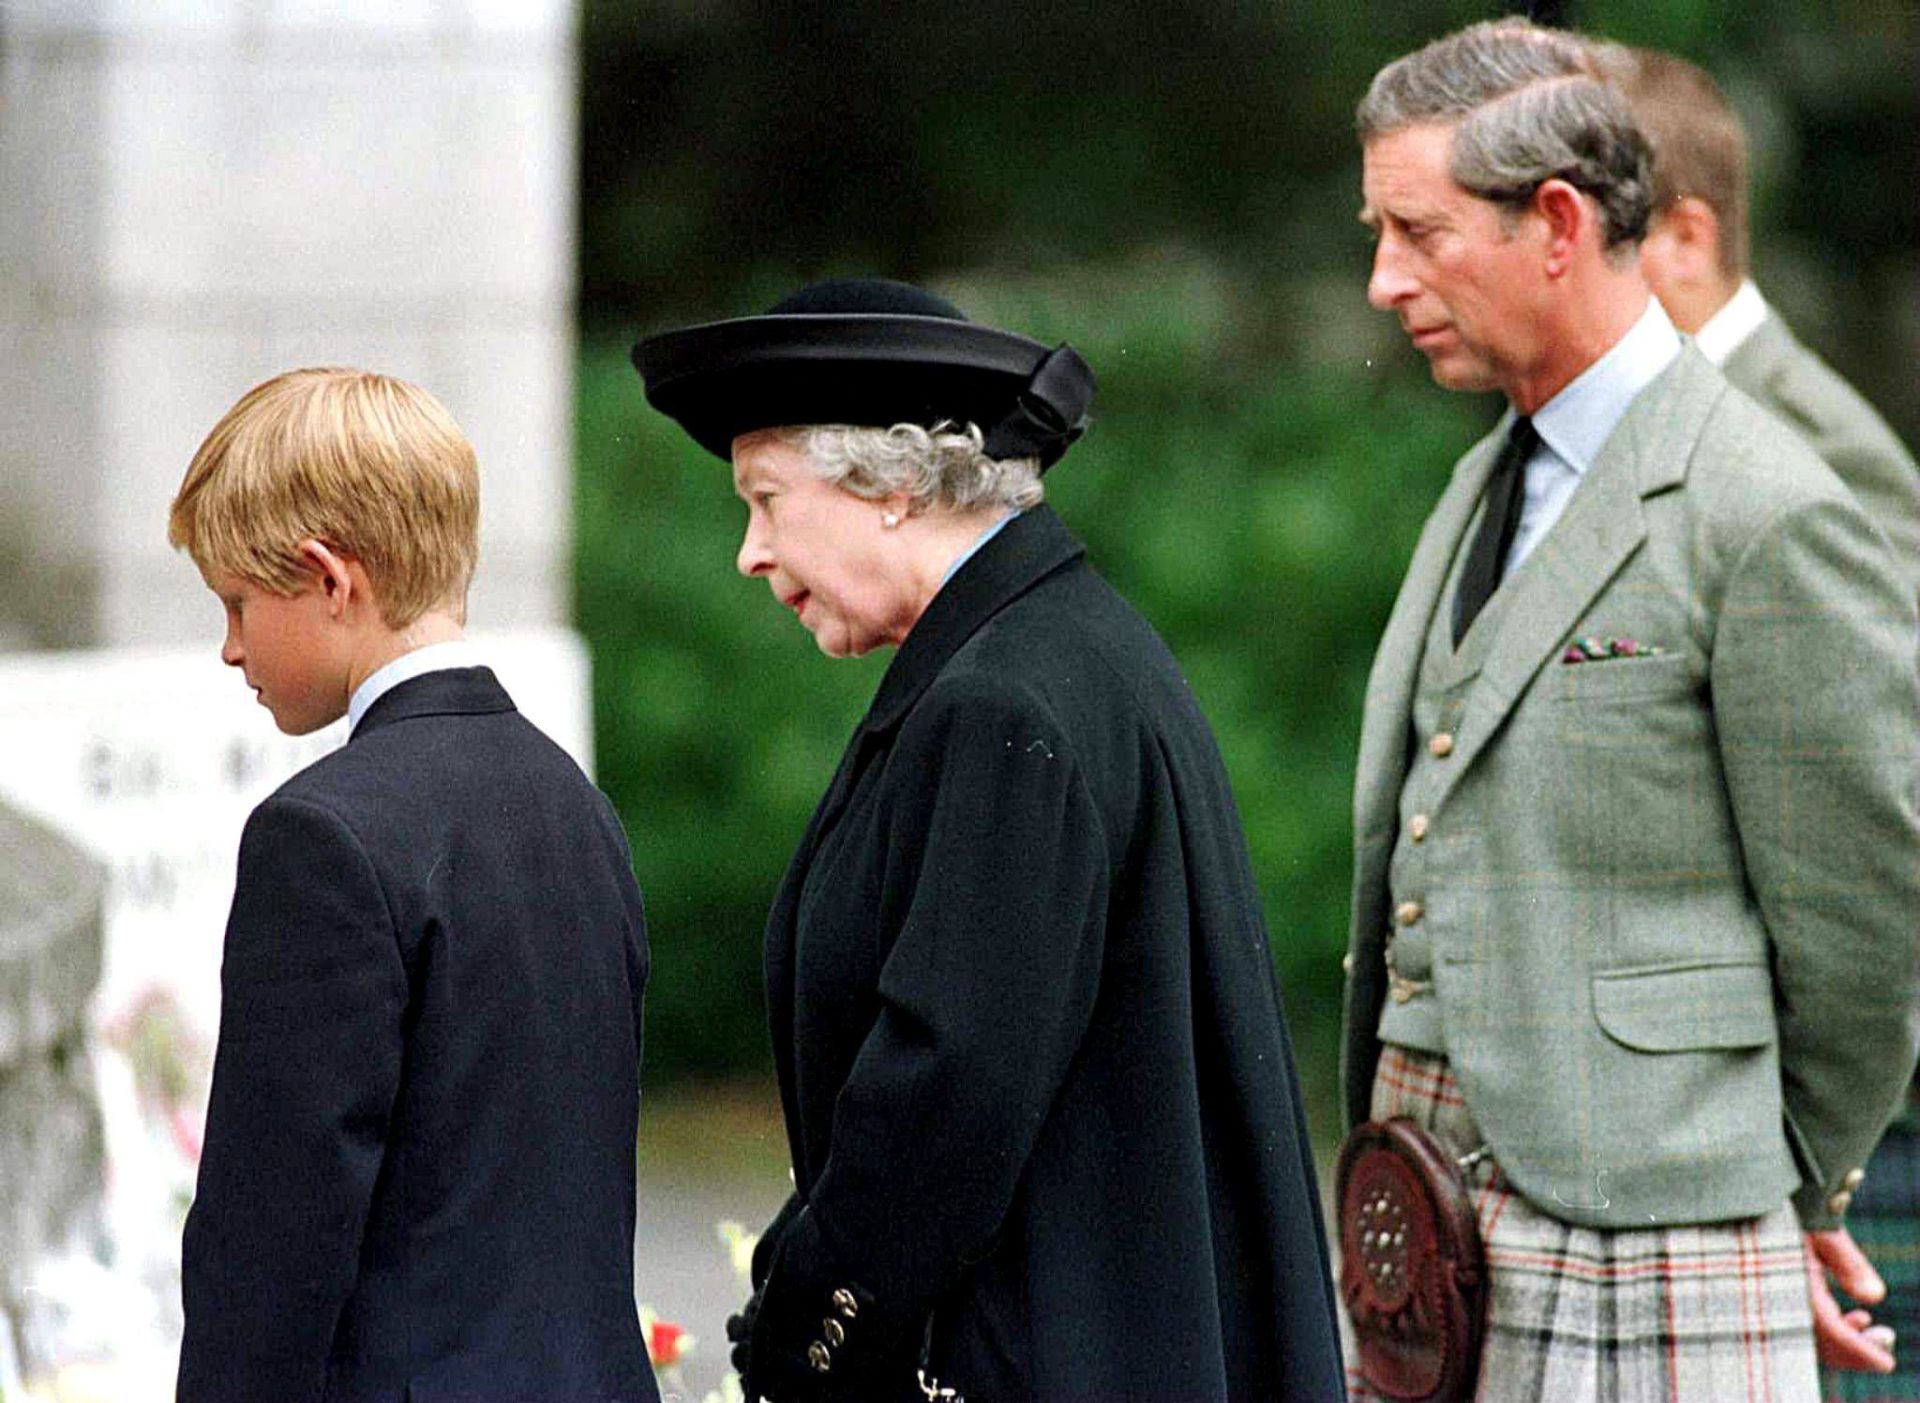 Queen Elizabeth II, her grandson Prince Harry and their son Prince Charles read messages written for the late Diana, Princess of Wales, in tributes from Britain following her death in 1997.